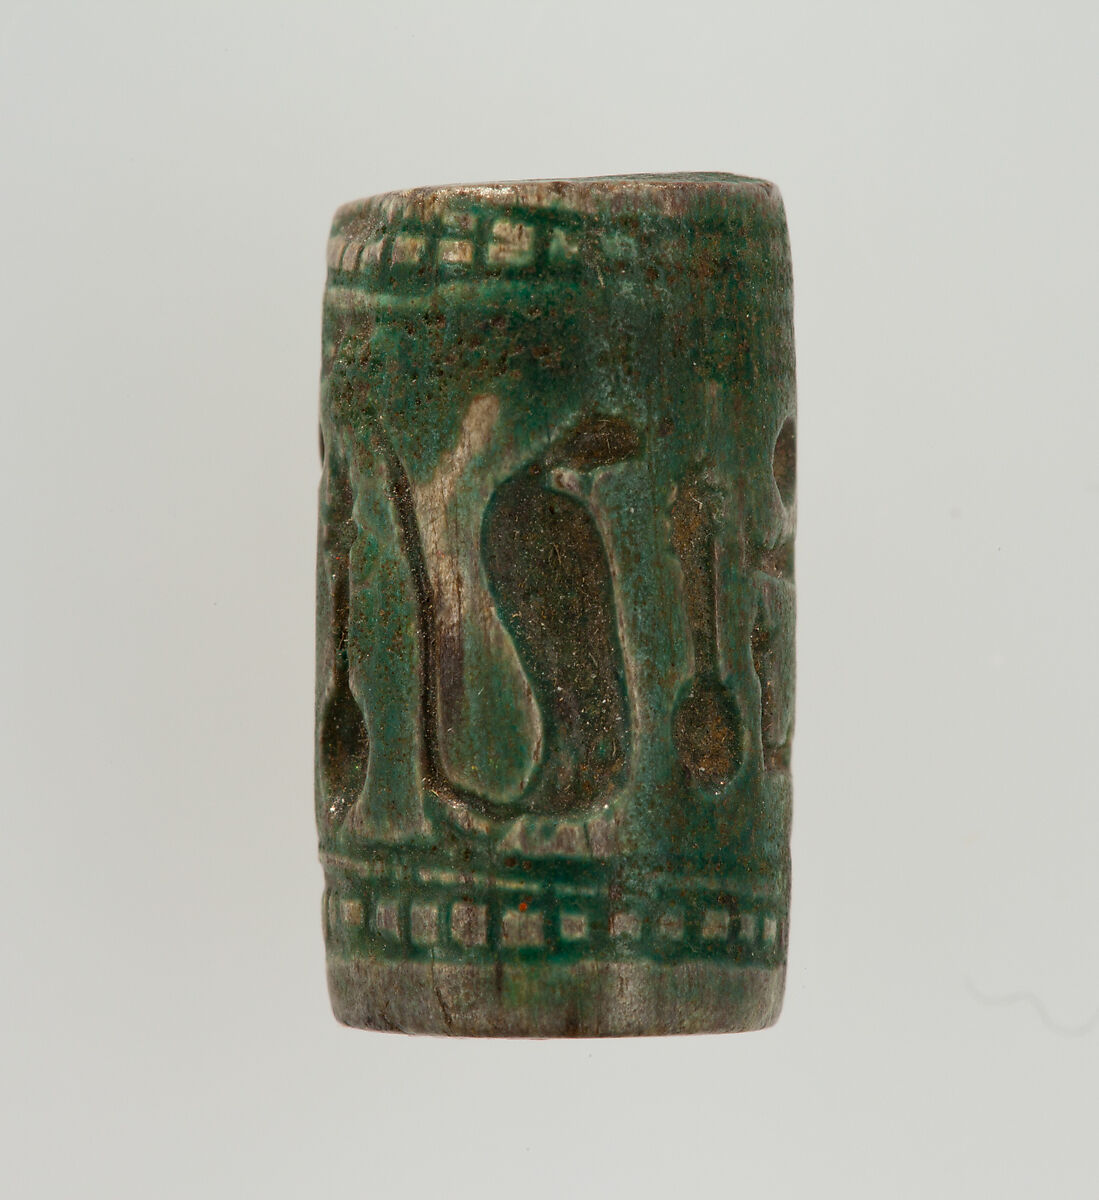 Cylinder Seal Inscribed with the Throne Name of Amenhotep I, Steatite 